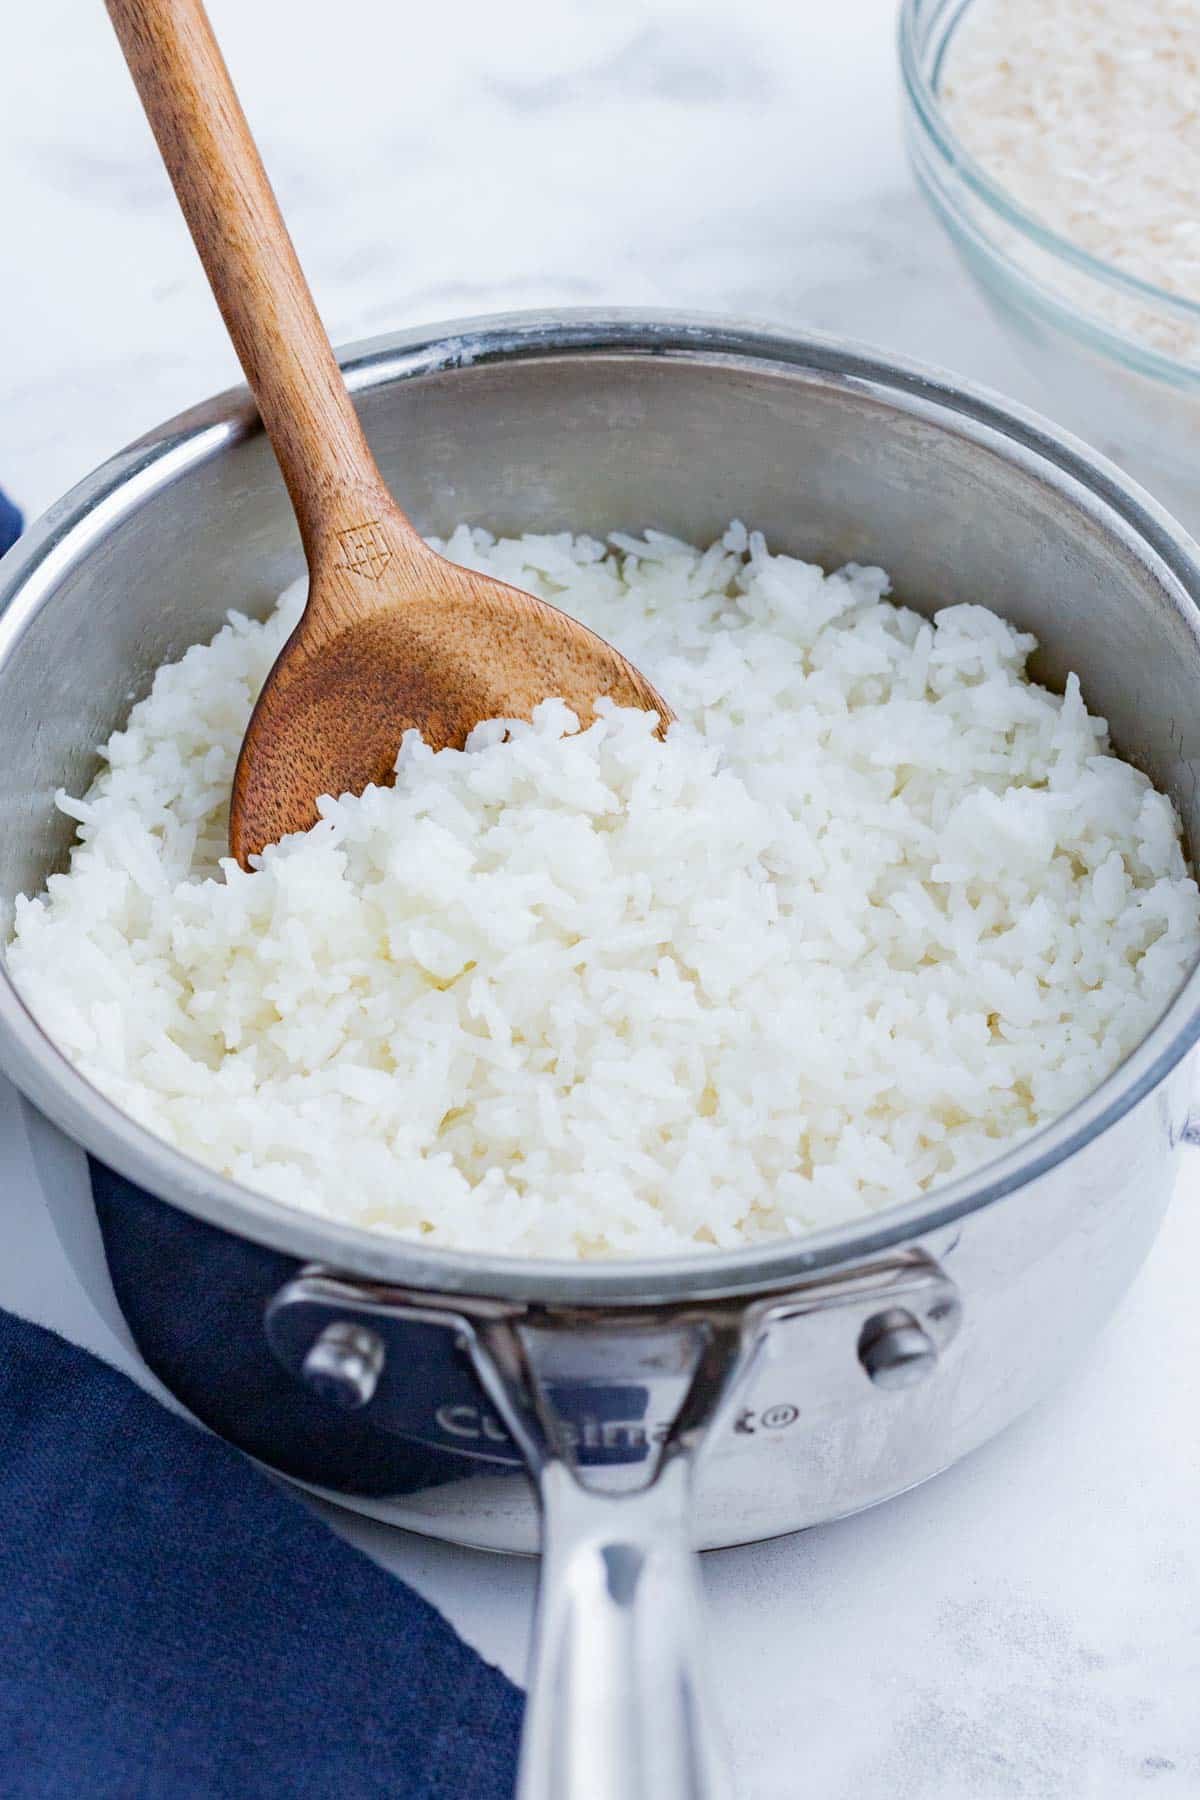 White rice cooked inside a silver pot with a wooden spoon.